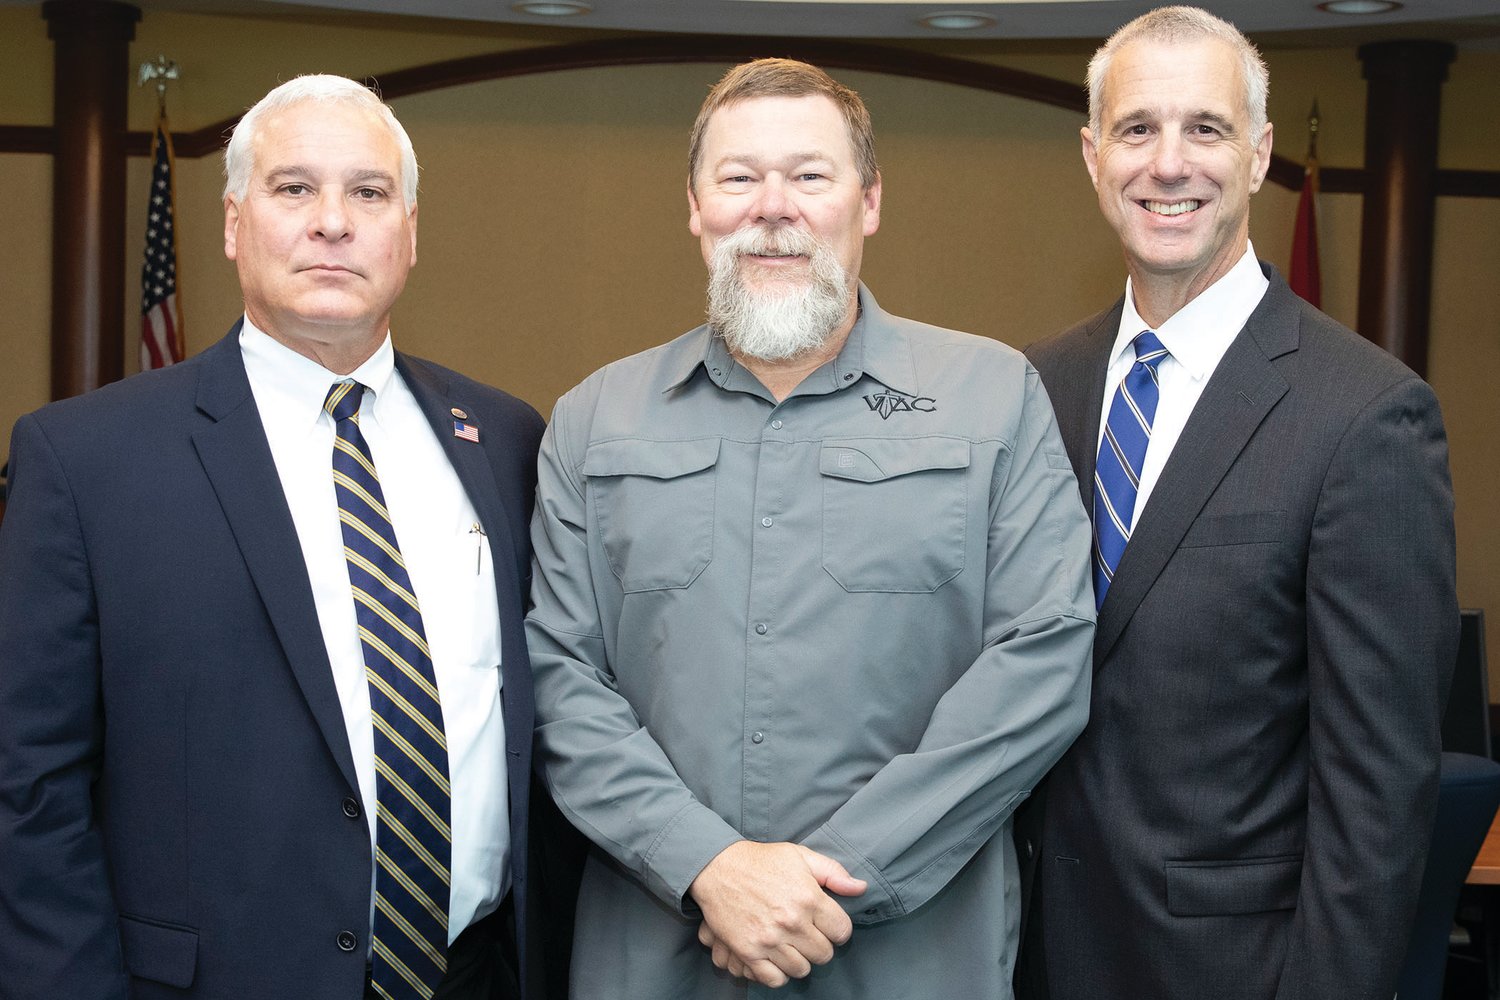 IRSC President Dr. Timothy Moore with Sergeant Major Kyle Lamb and Lieutenant General Reynold Hoover (left to right). General Hoover and SGM Lamb spoke at the IRSC Treasure Coast Public Safety Training Complex at the “21st Century Leadership — From the Battlefield to the C-Suite” conference attended by nearly 100 regional law enforcement professionals on June 24.